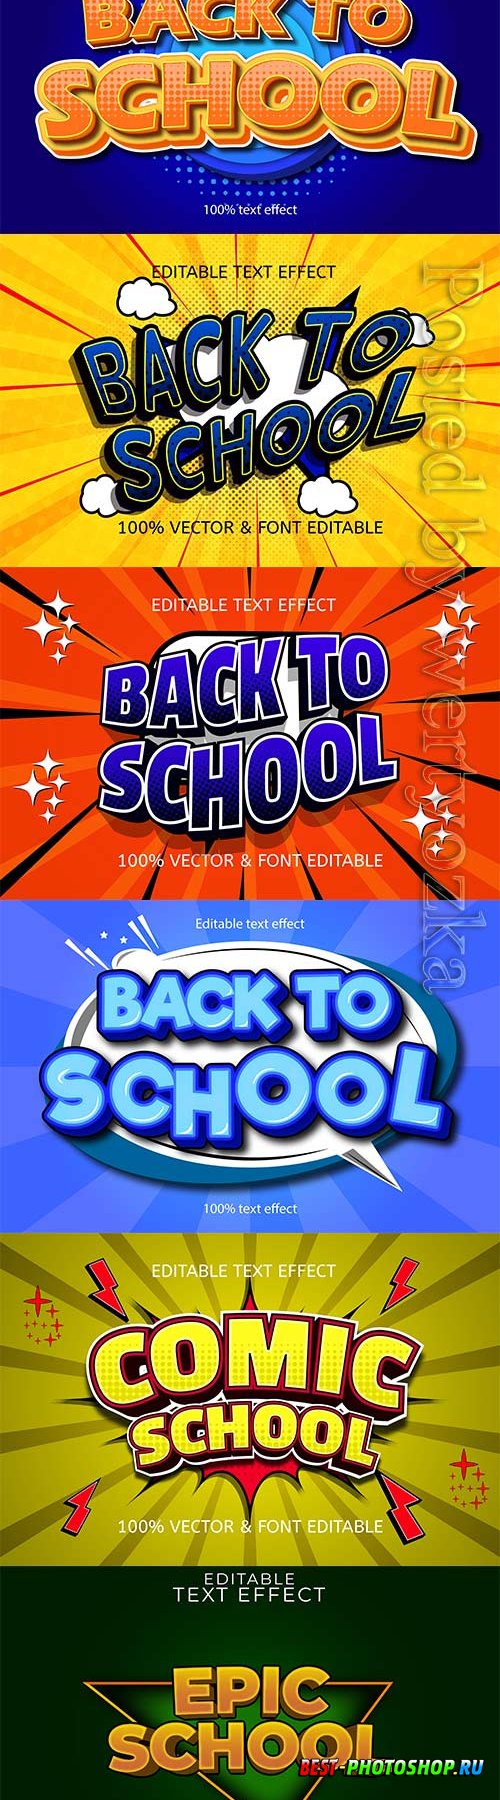 Back to school editable text effect vol 7